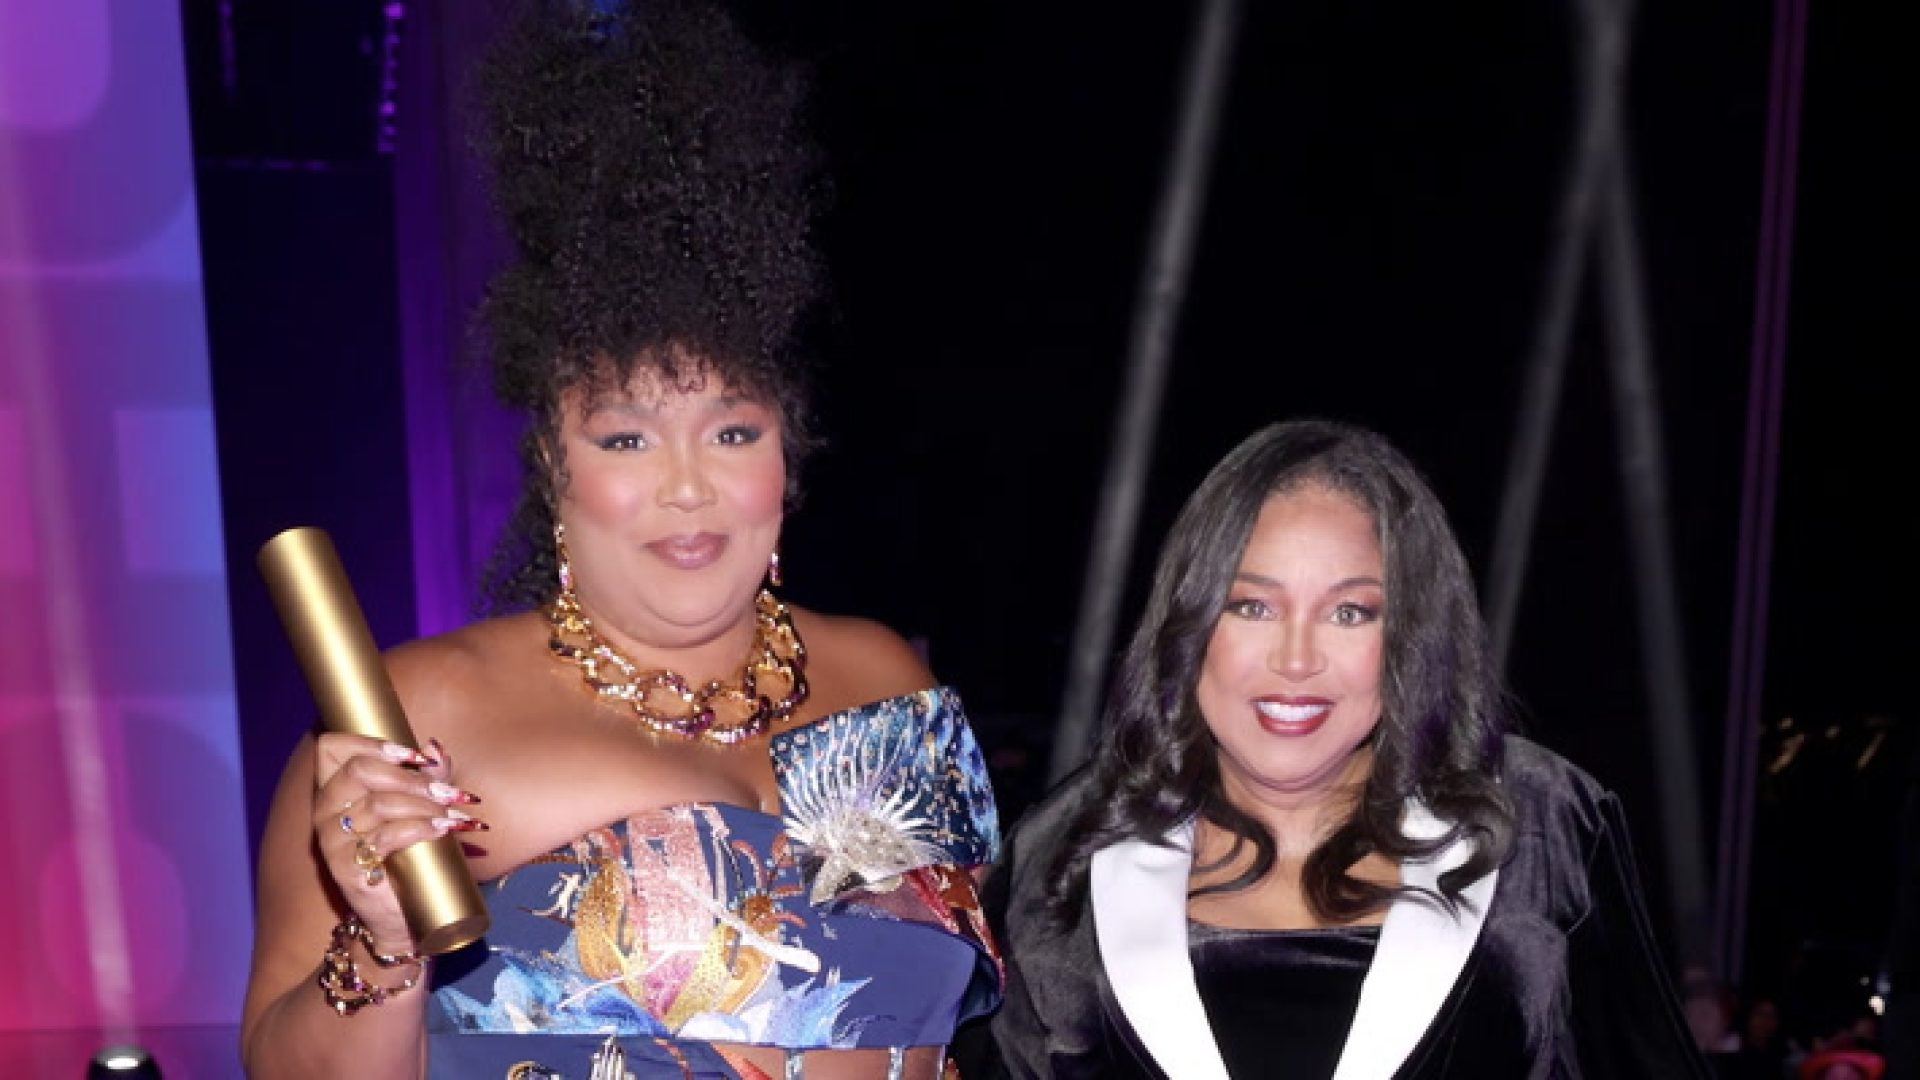 WATCH: In My Feed – We Love These Moments Between Lizzo and Her Mom